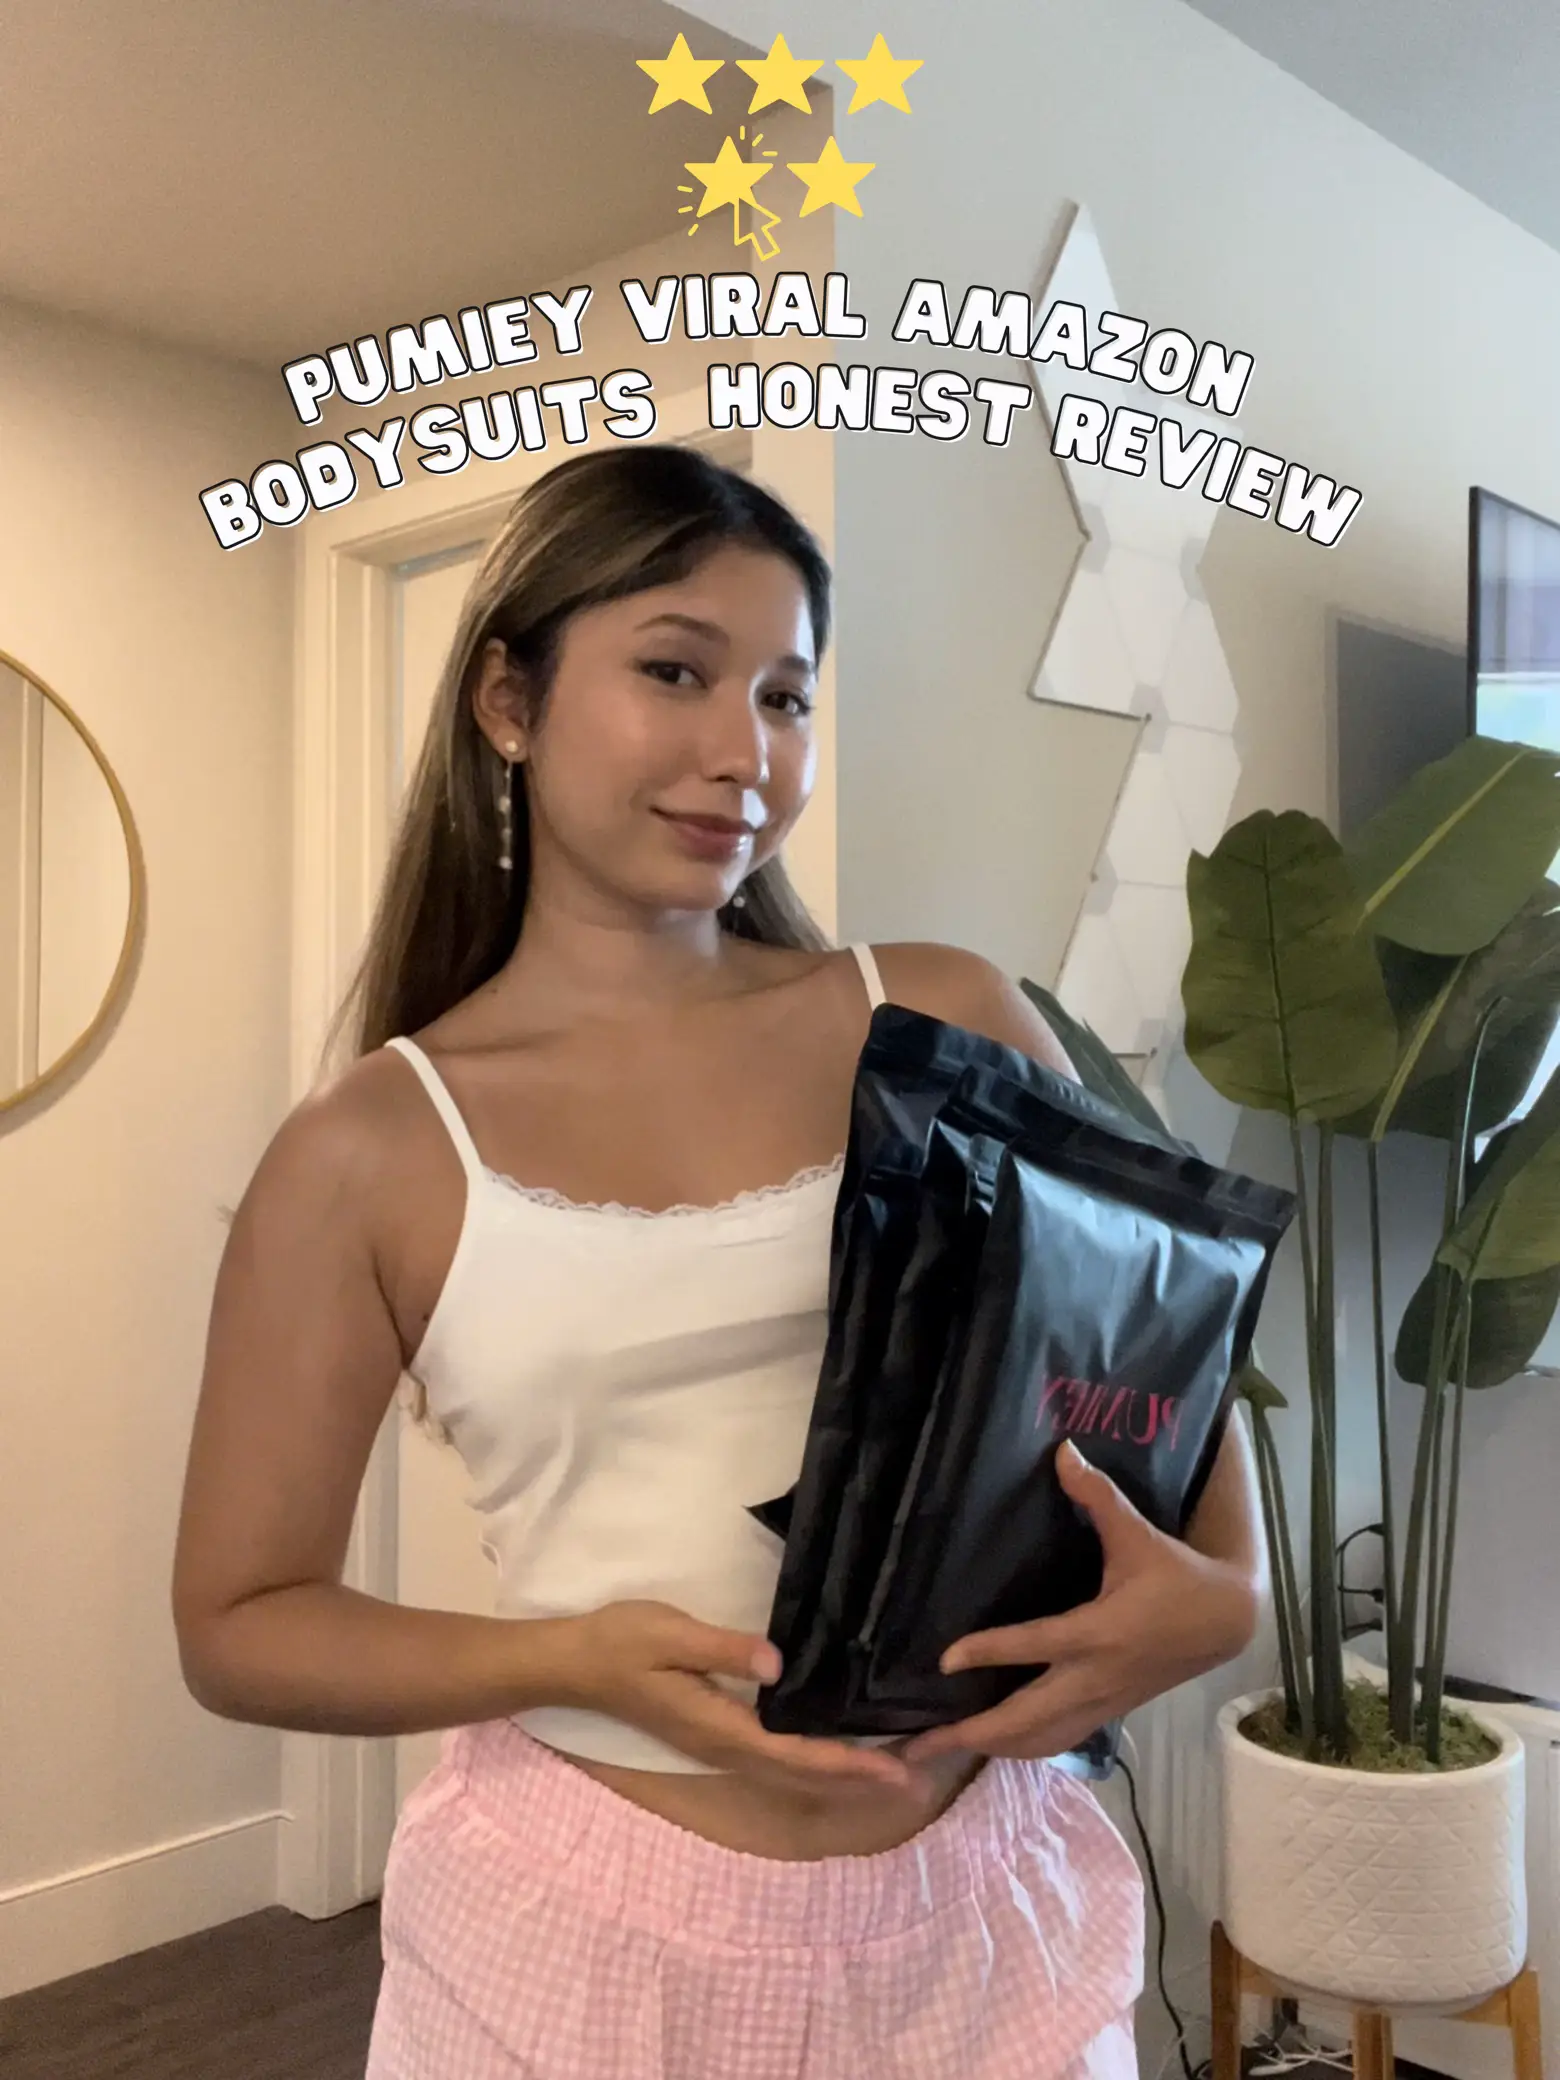 Pumiey Viral  Bodysuits Honest Review, Gallery posted by  Alisonthazin62